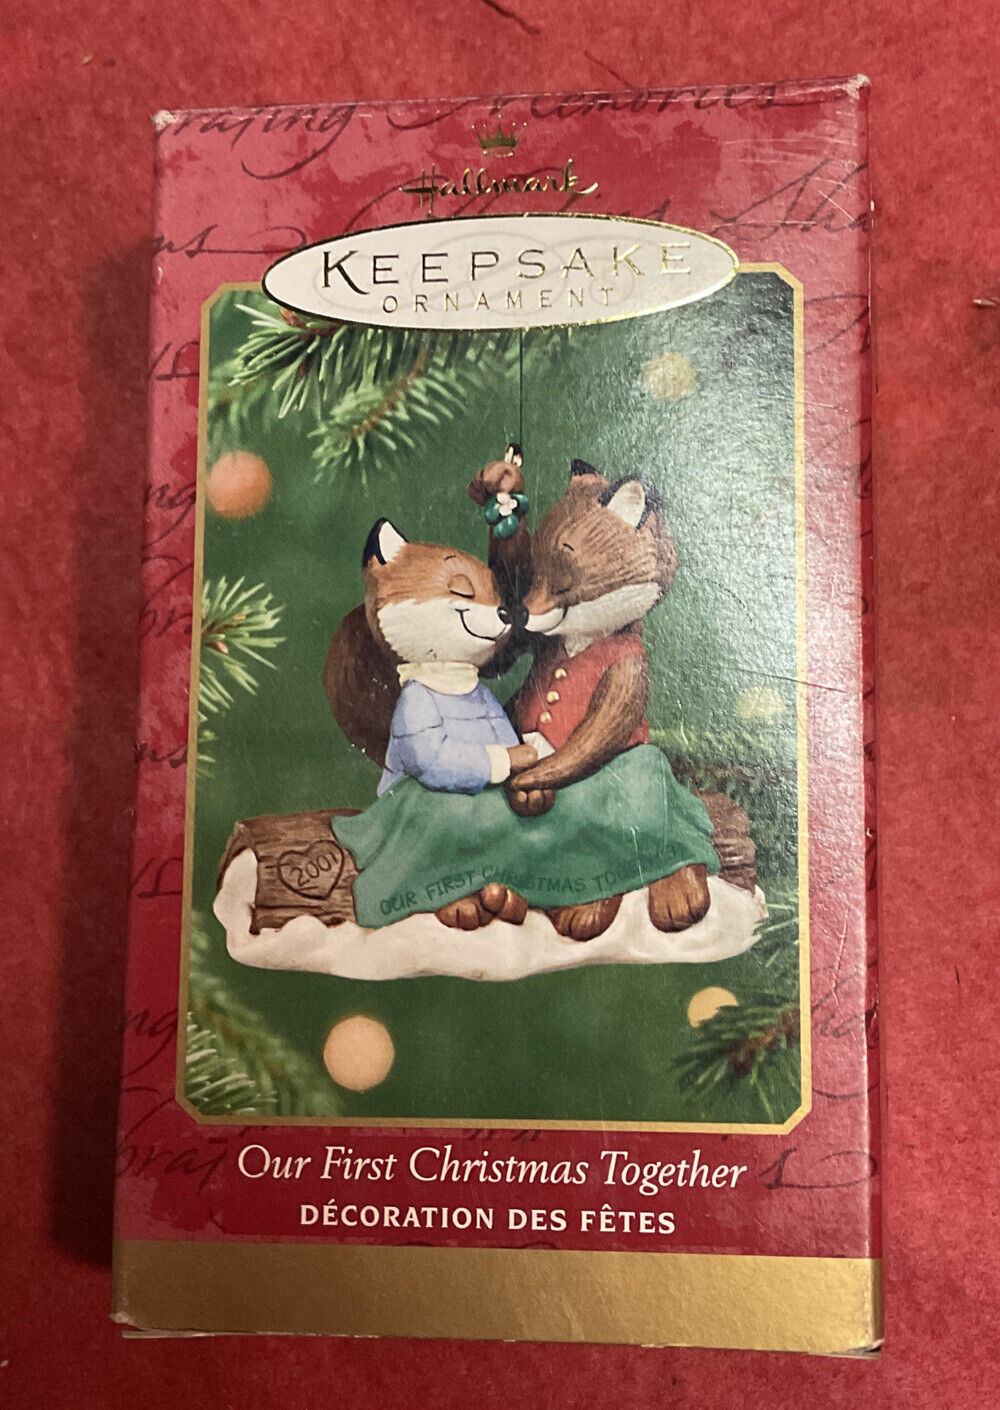 2001 Hallmark Our First Christmas Together Foxes in Love Ornament